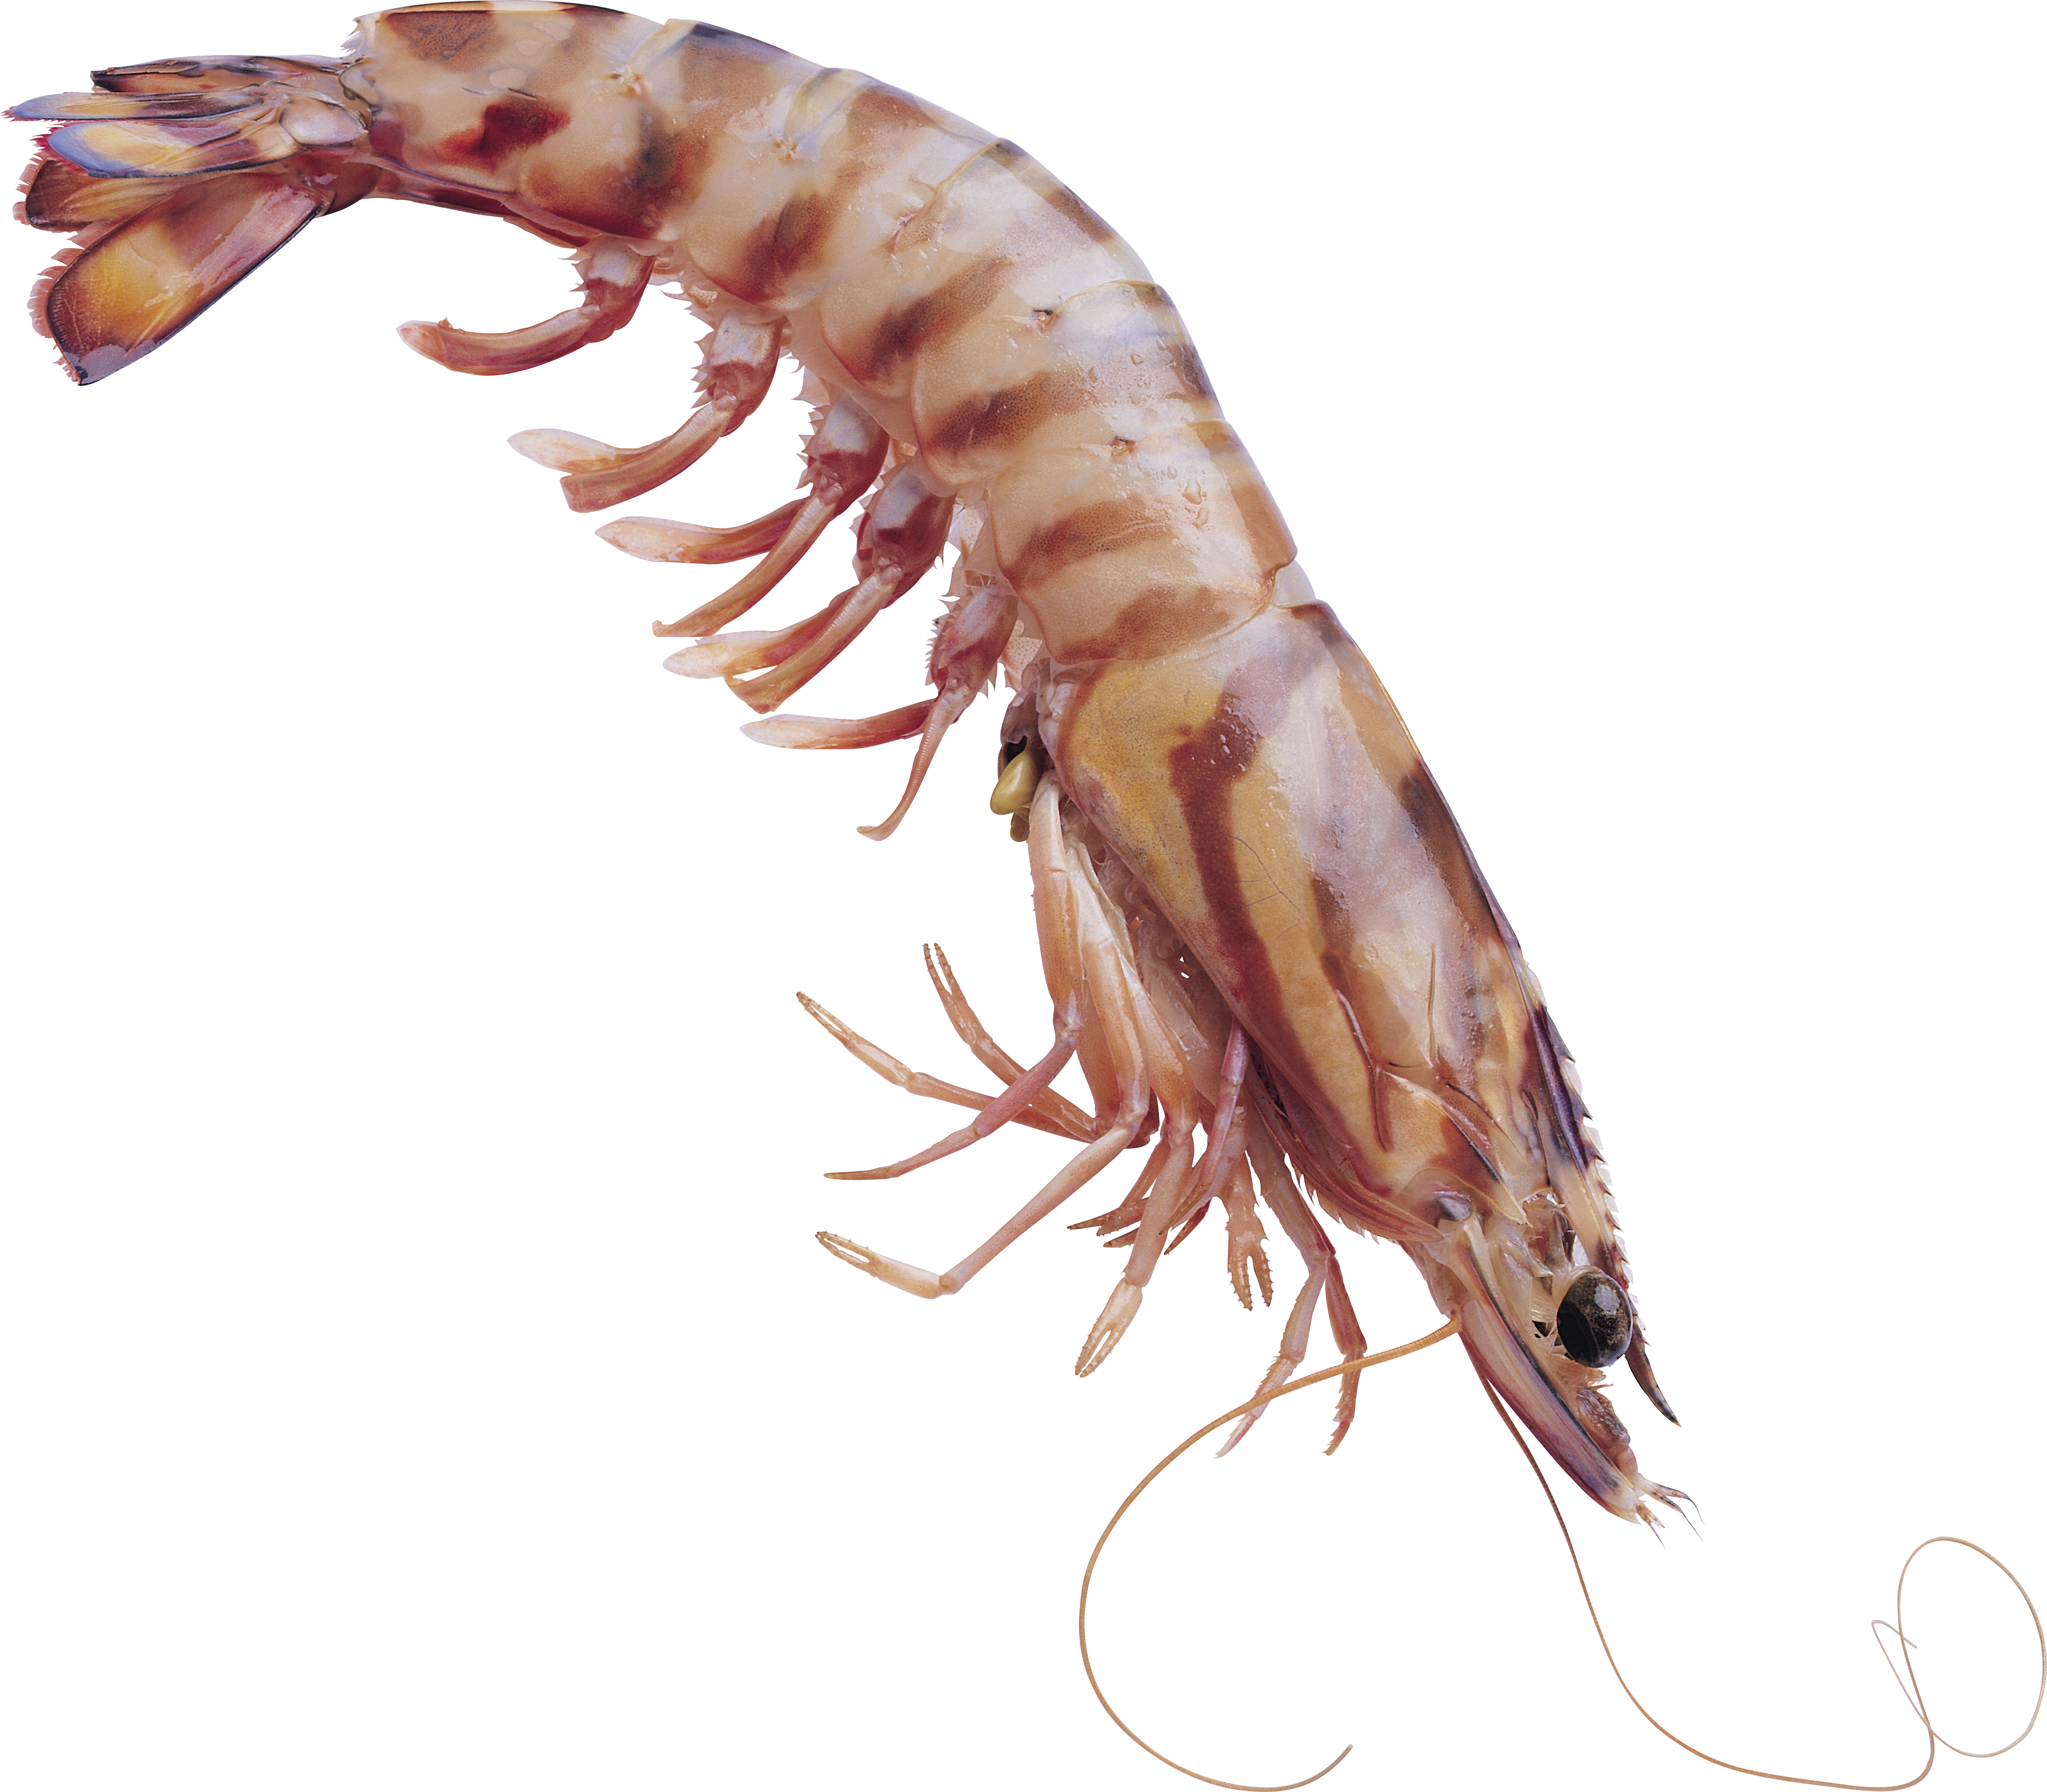 A Shrimp With Long Tails